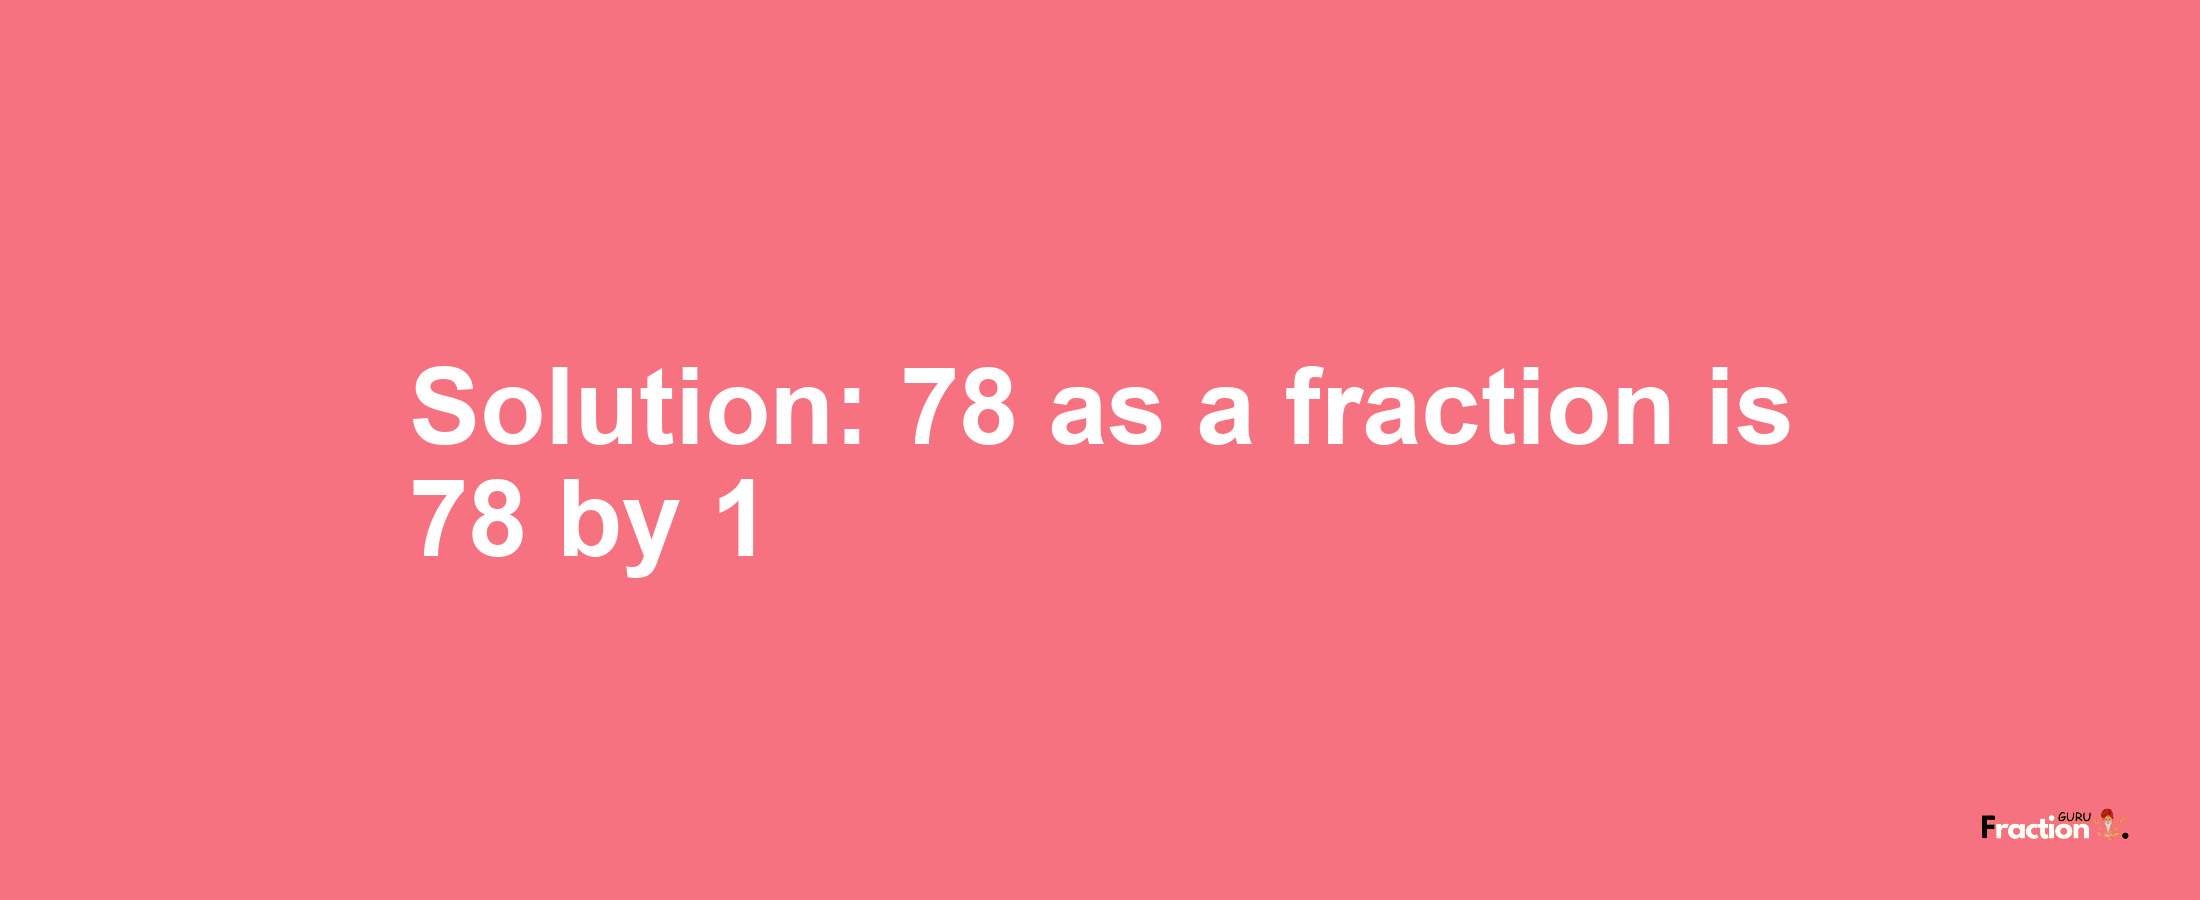 Solution:78 as a fraction is 78/1